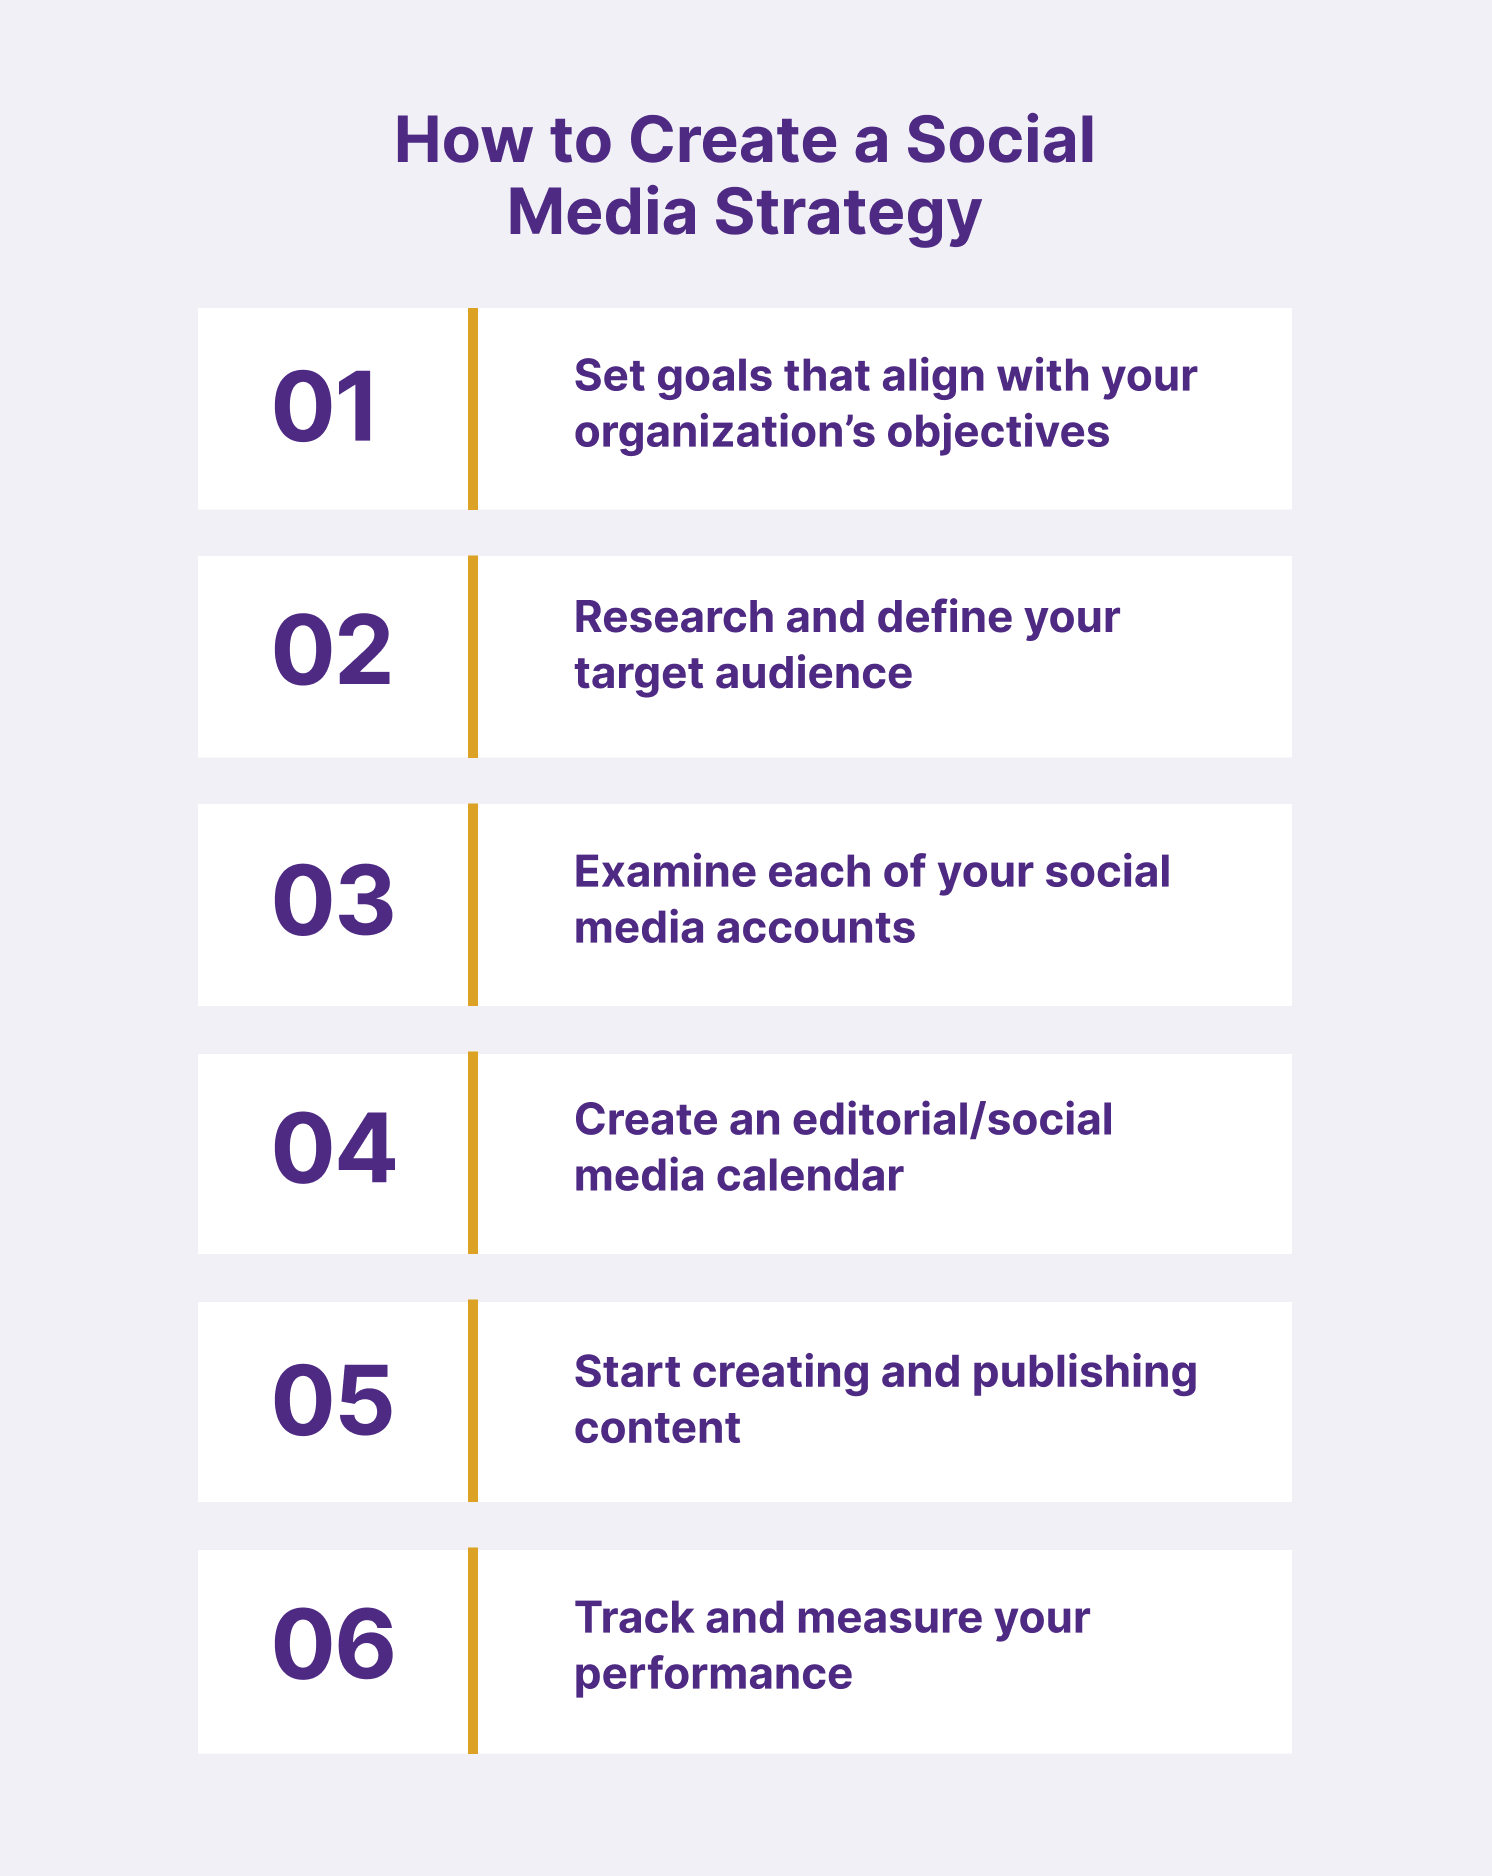 A graphic that lists out the six steps to creating a social media strategy.